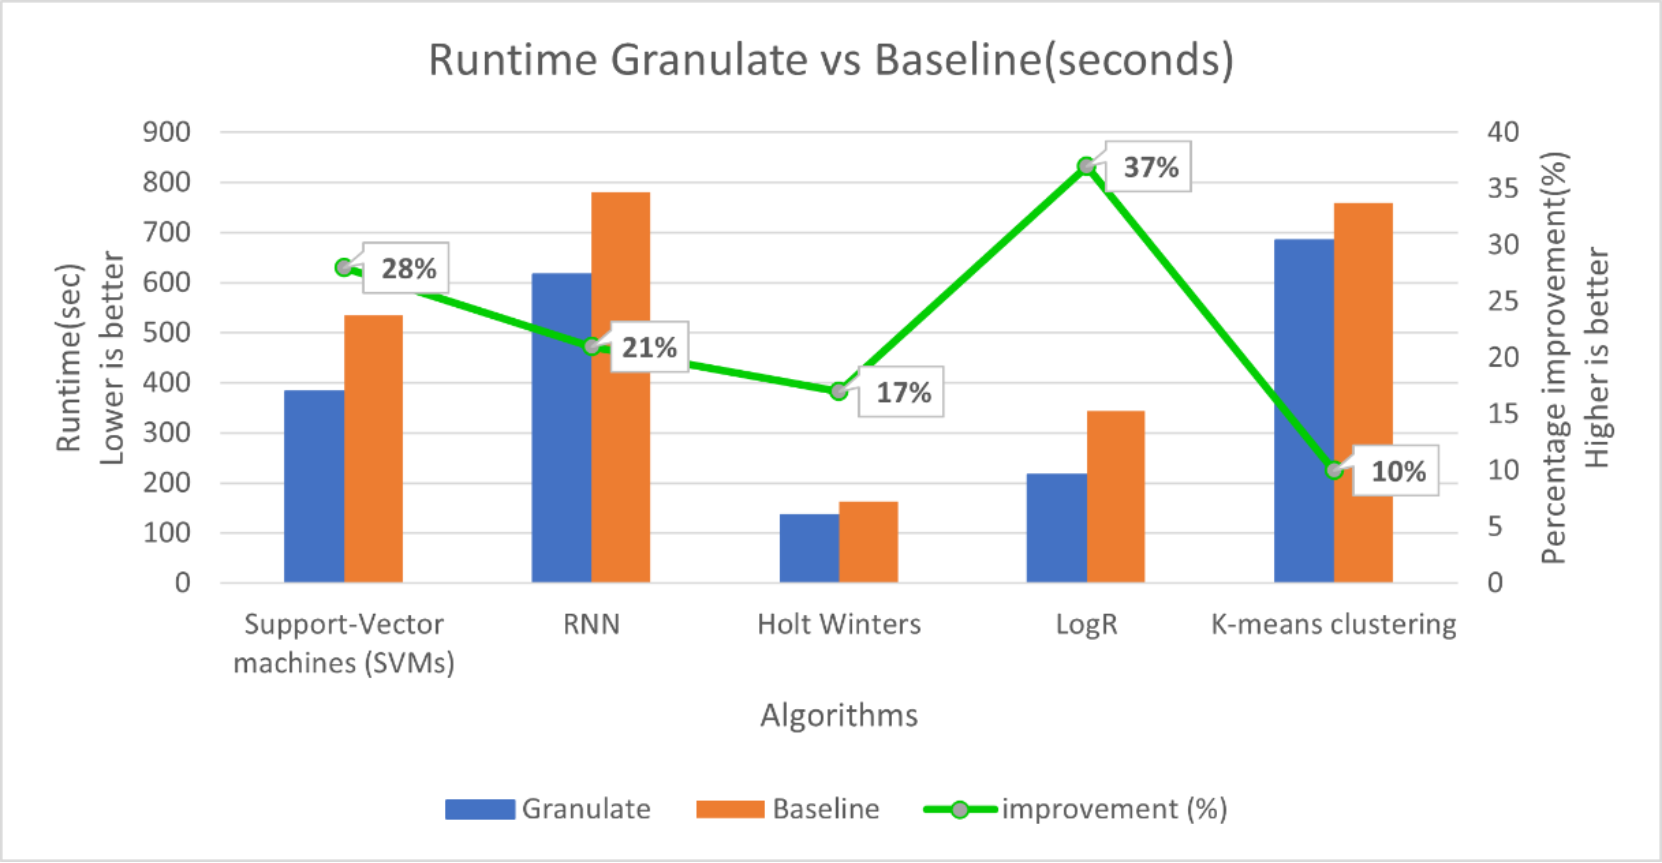 A graph of Granulate vs. Baseline training times improvements in seconds